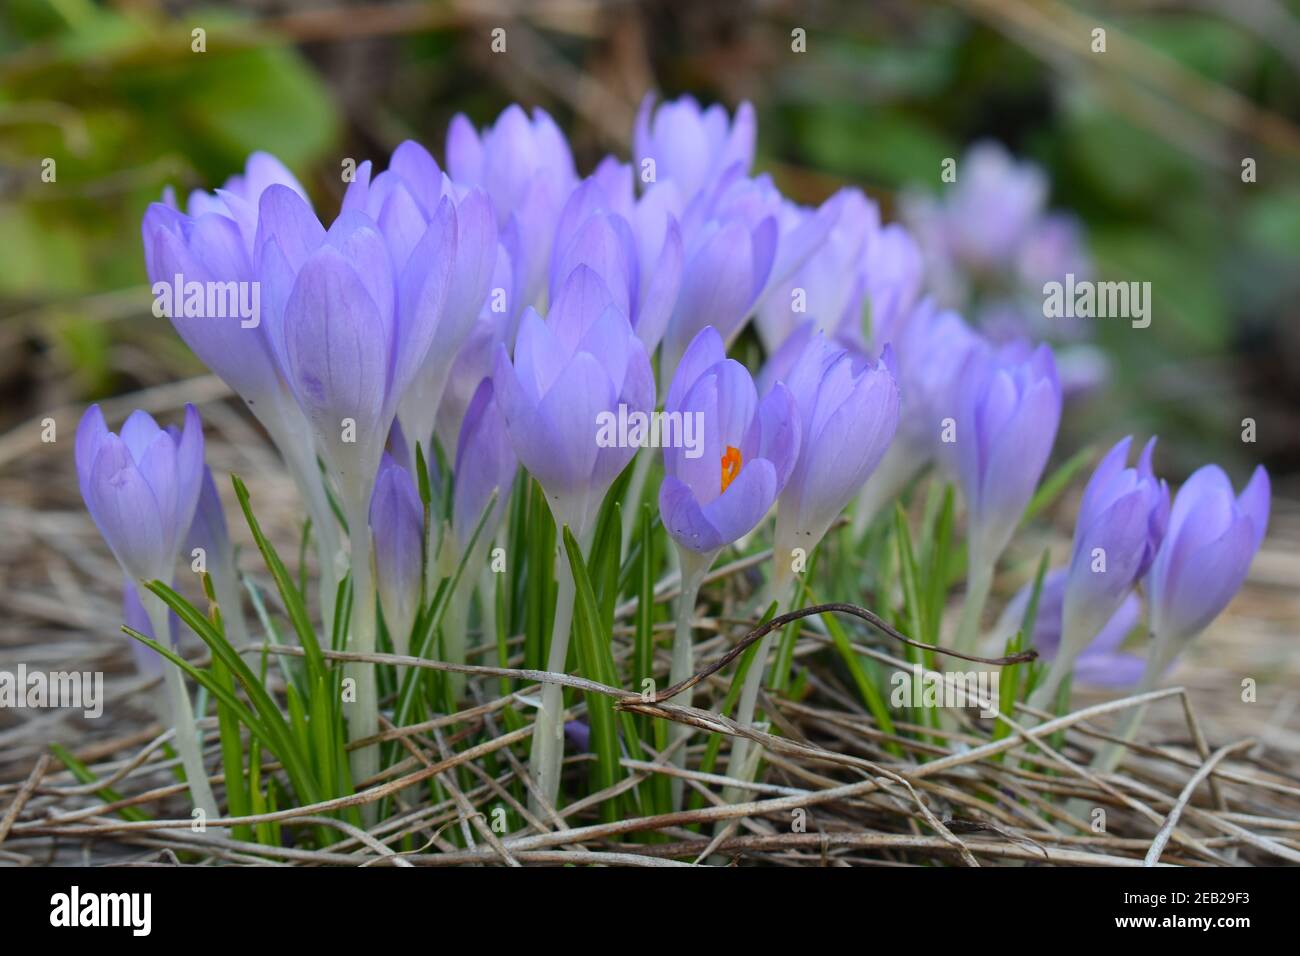 Purple cup-shaped crocus flowers are striped upward-facing over grasslike leaves with white central stripe They appear in late winter and attract bees Stock Photo